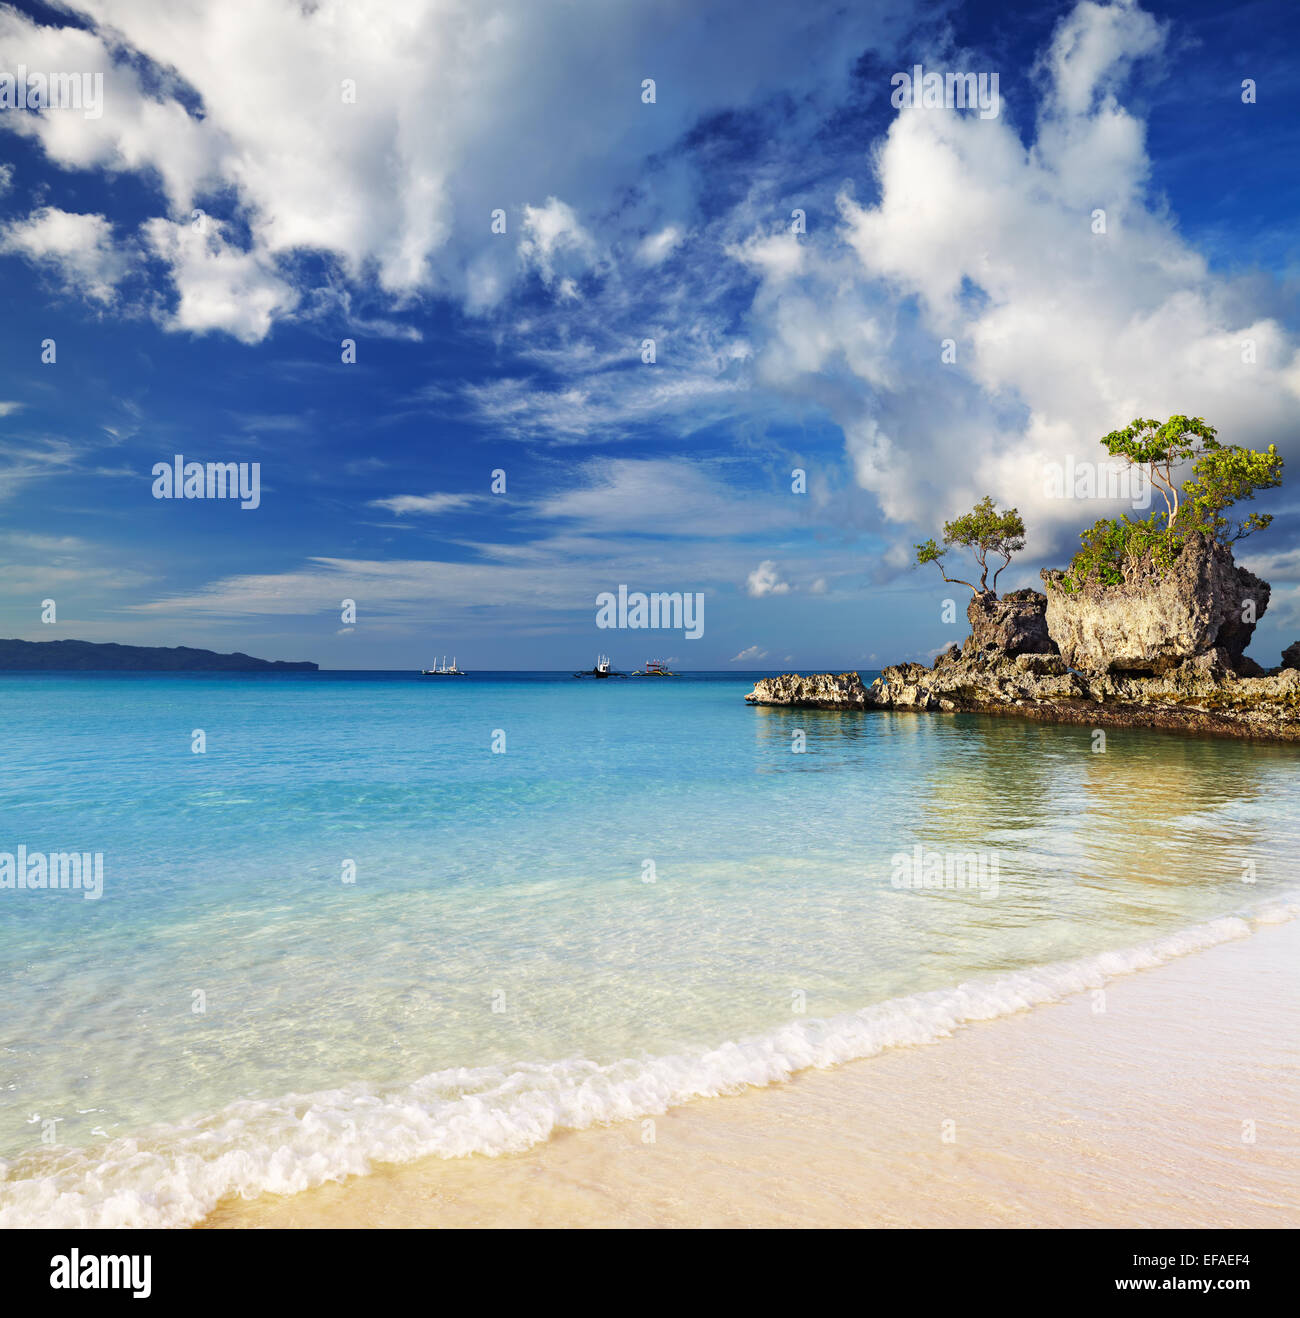 Tropical beach, Willy's rock, Boracay Island, Philippines Banque D'Images